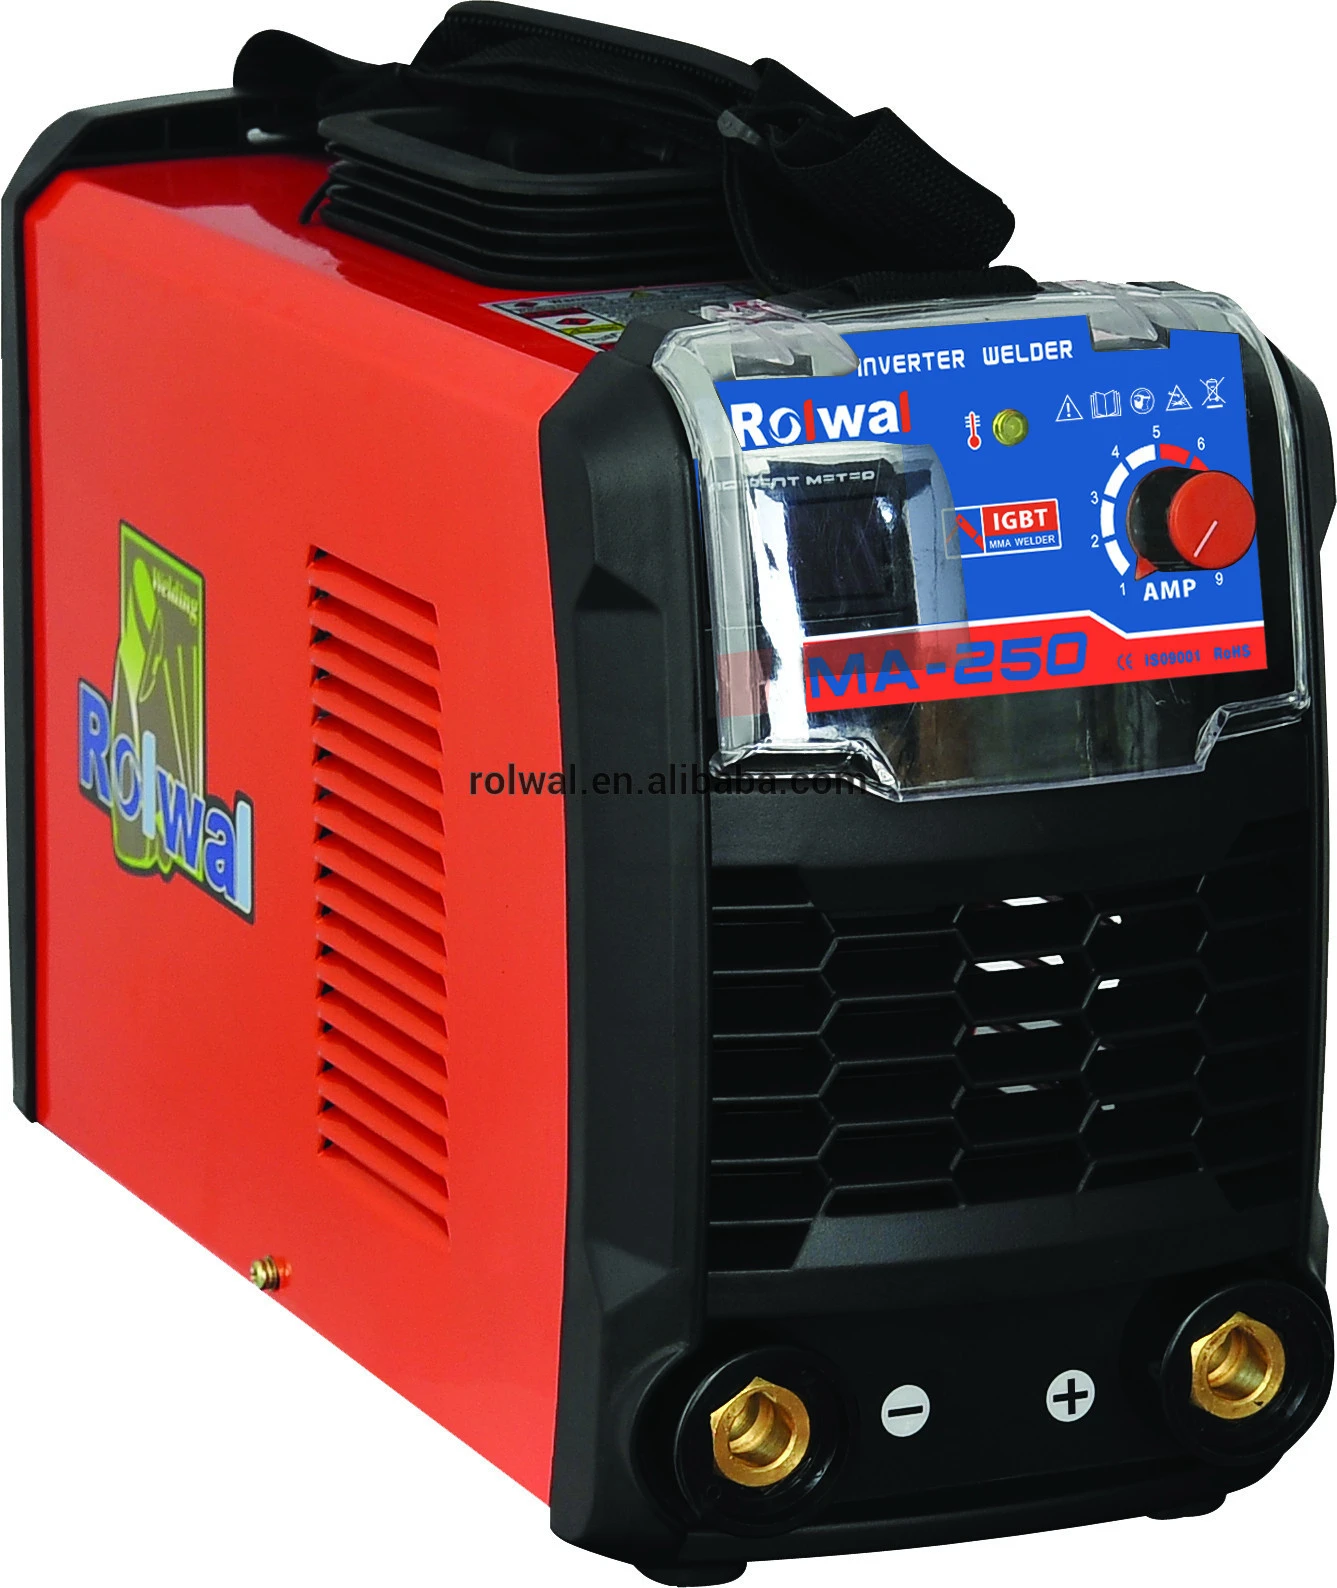 Rolwal Portable Electrical Stick Manual Metal Arc Inverter Welding Machine Price 160 amp 200 amp Arc Welders